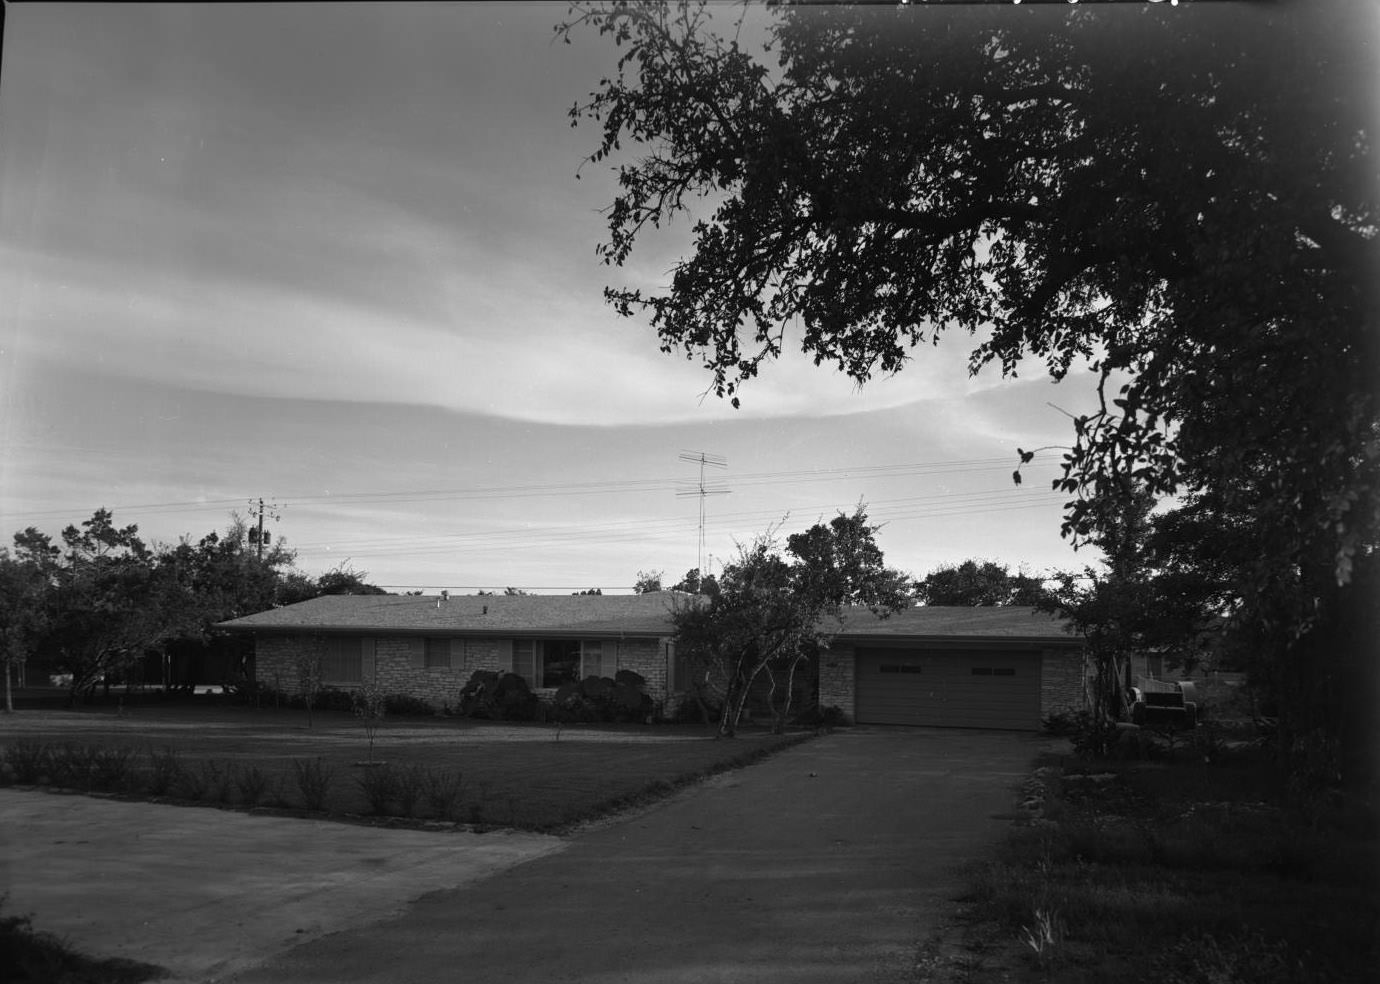 1950s Ranch-Style Harry McKee Home in Rollingwood, 1959.